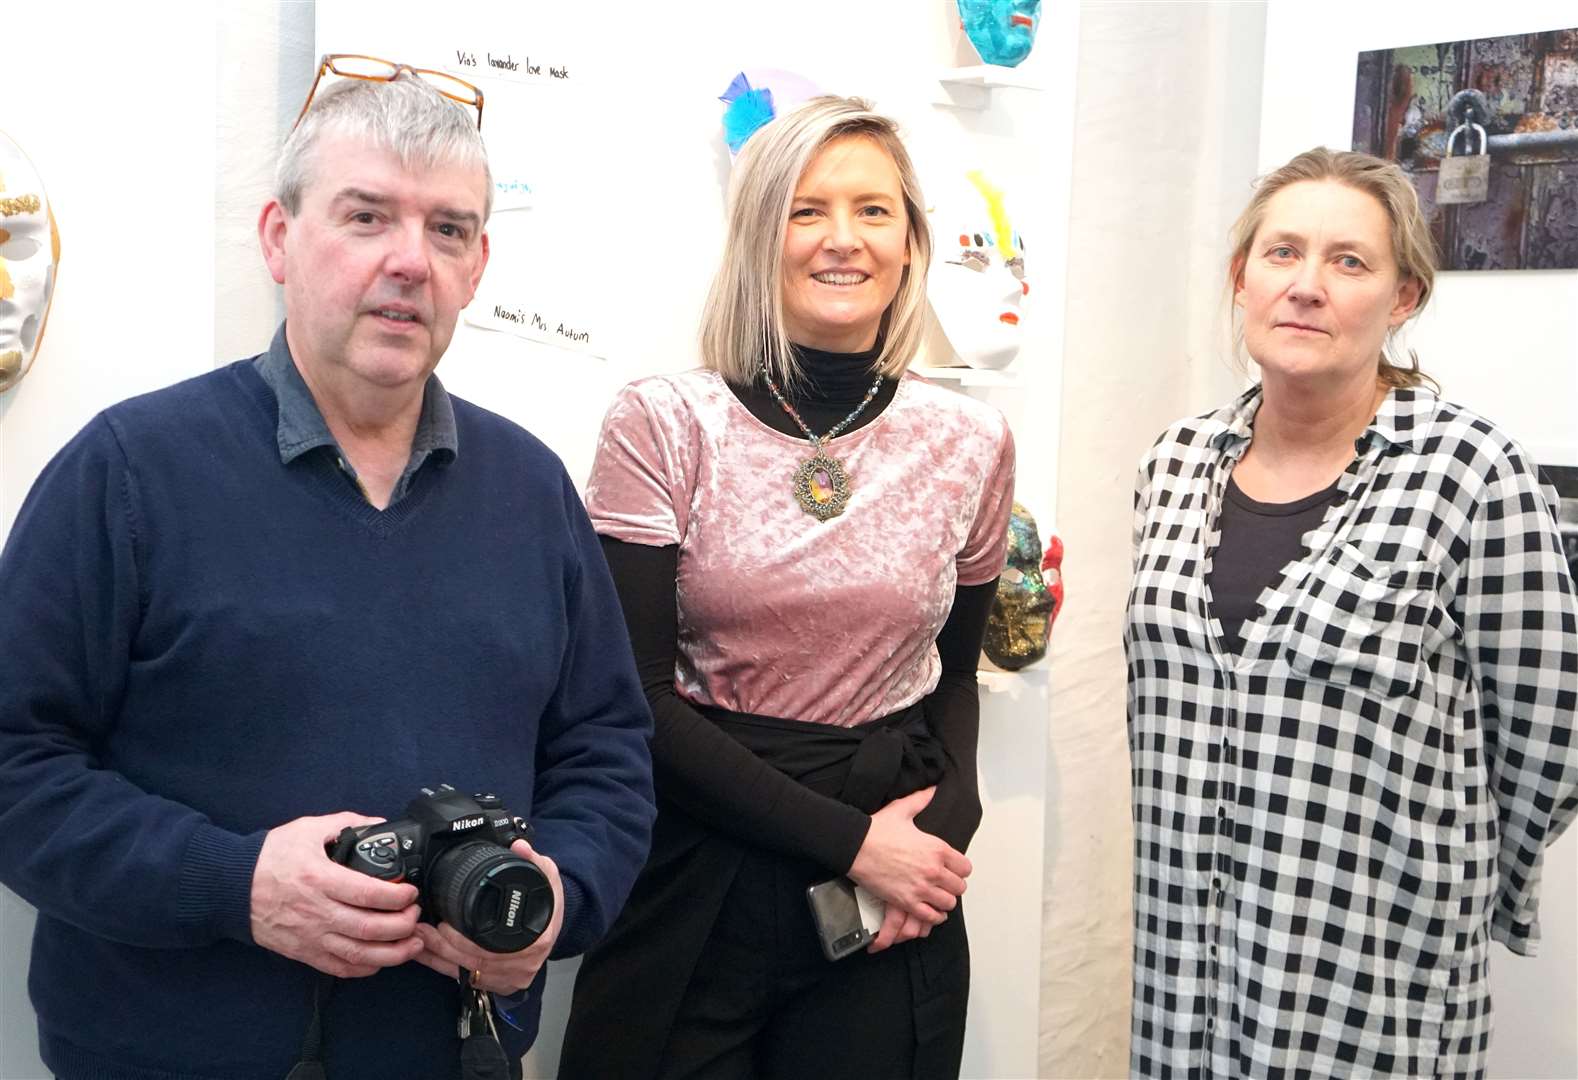 Tom Briscoe, Laura O'Kane and Merran Gunn at the Quatre Bras gallery on Saturday. Pictures: DGS